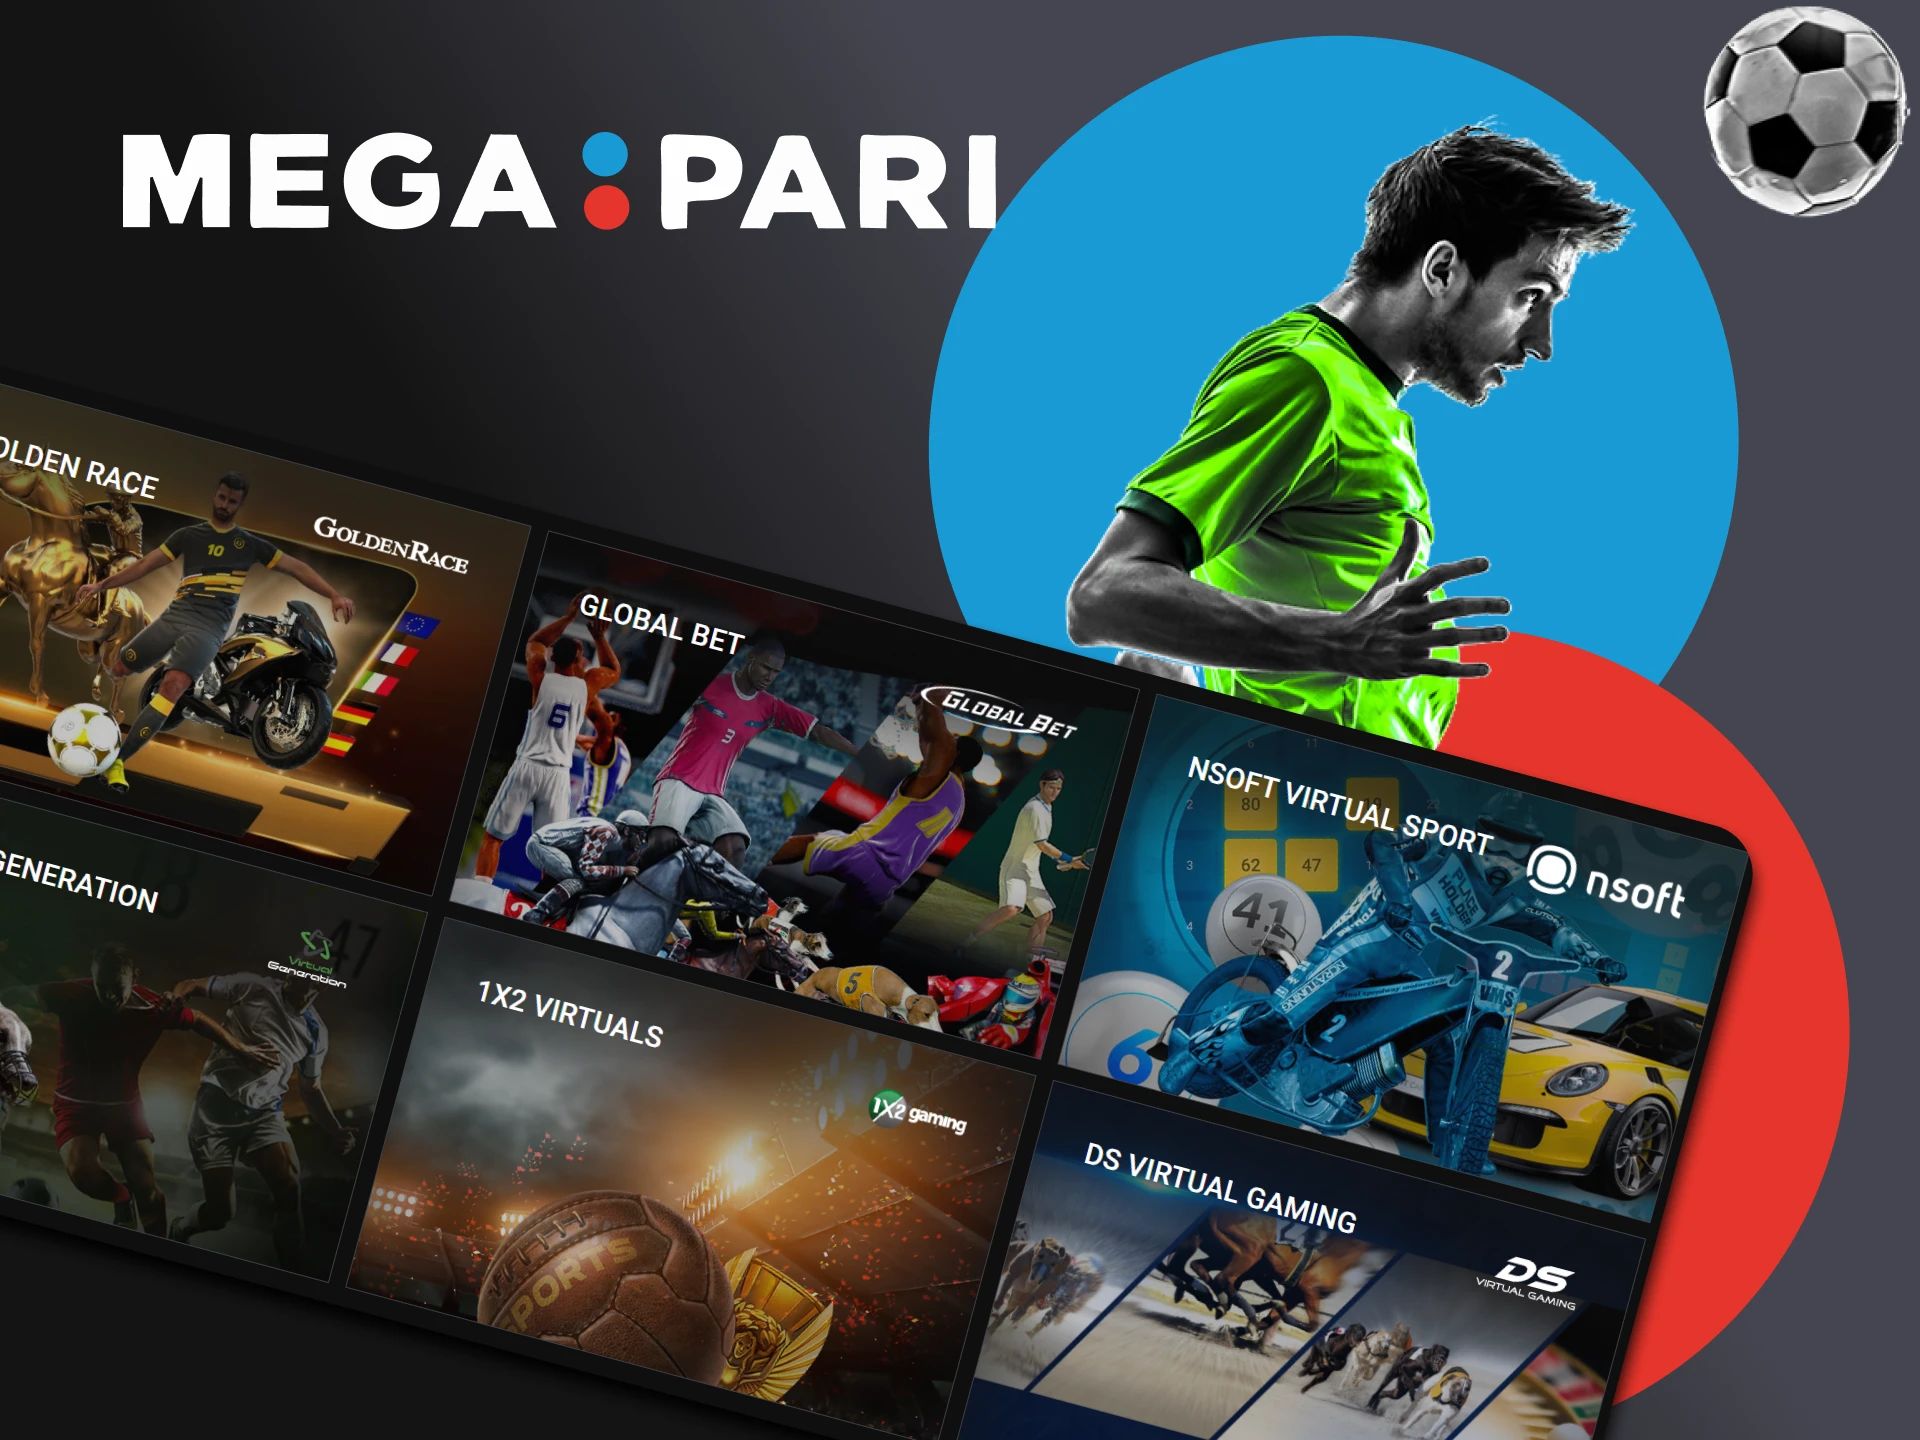 Learn all about Vsports at Megapari.